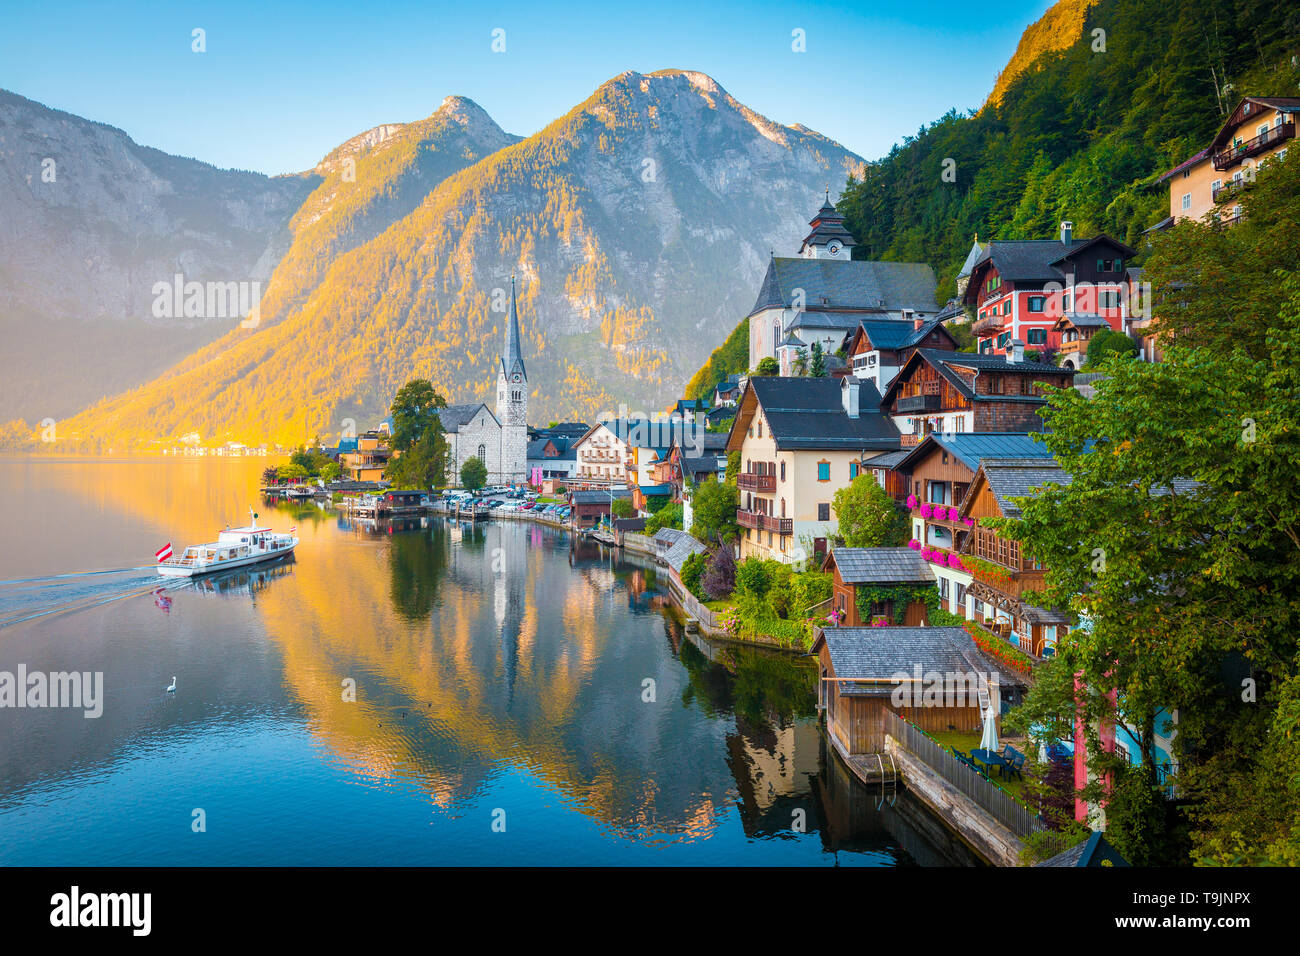 Classic postcard view of famous Hallstatt lakeside town in the Alps with traditional passenger ship in early morning light at sunrise, Austria Stock Photo